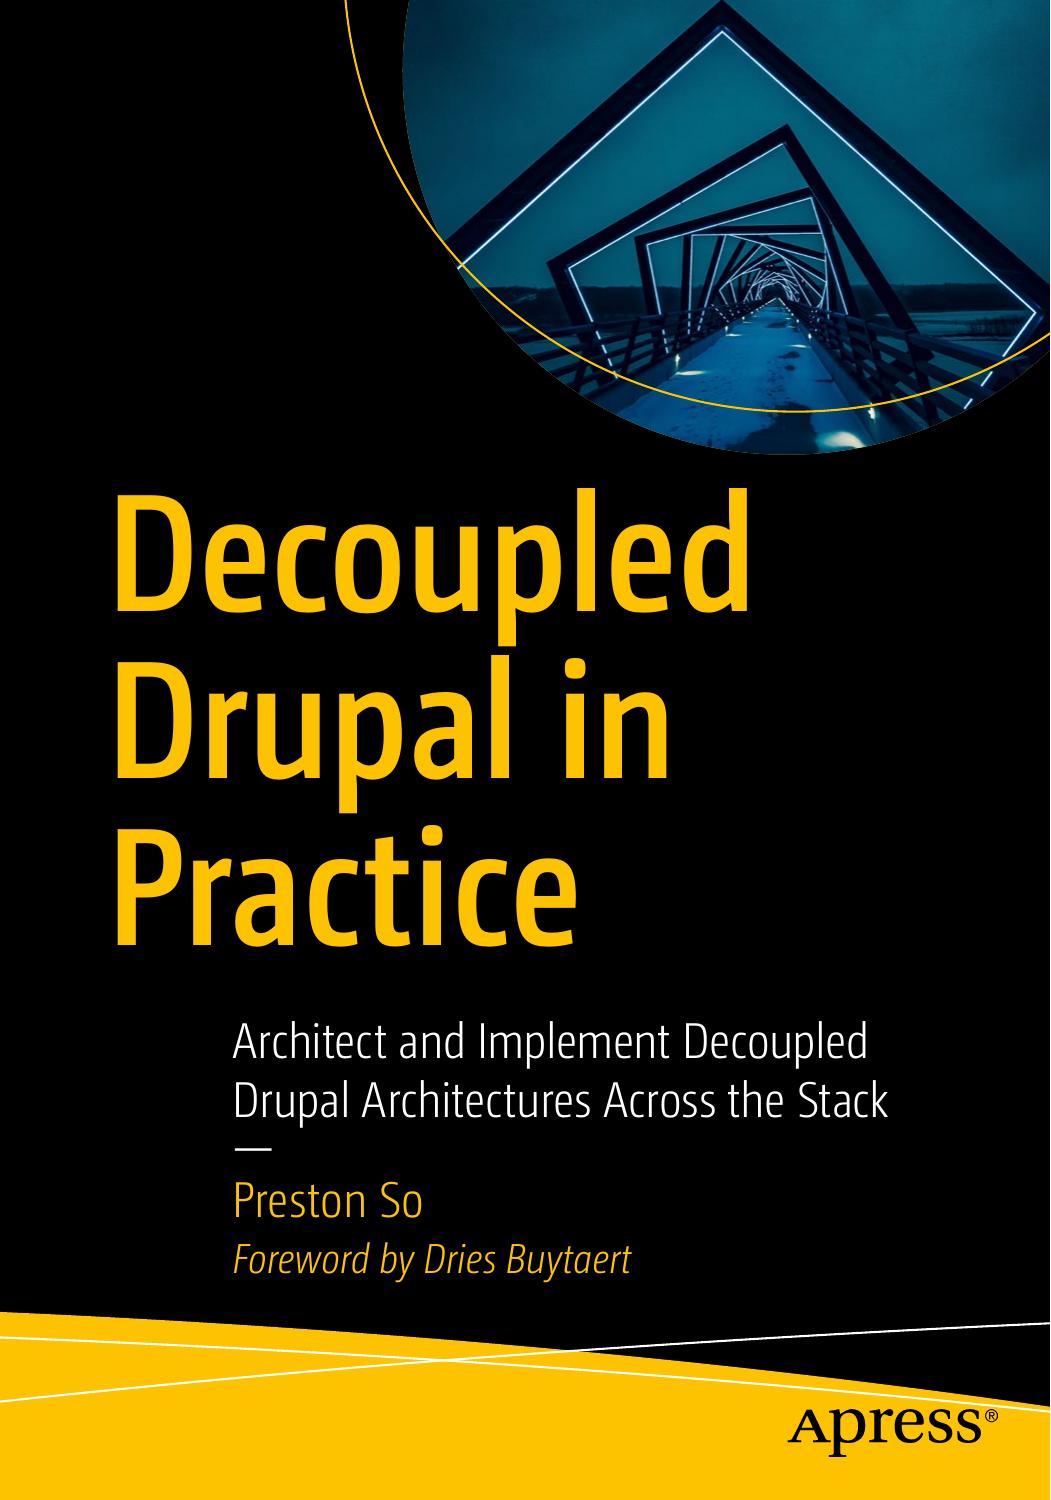 Decoupled Drupal in Practice  Architect and Implement Decoupled Drupal Architectures Across the Stack 2018